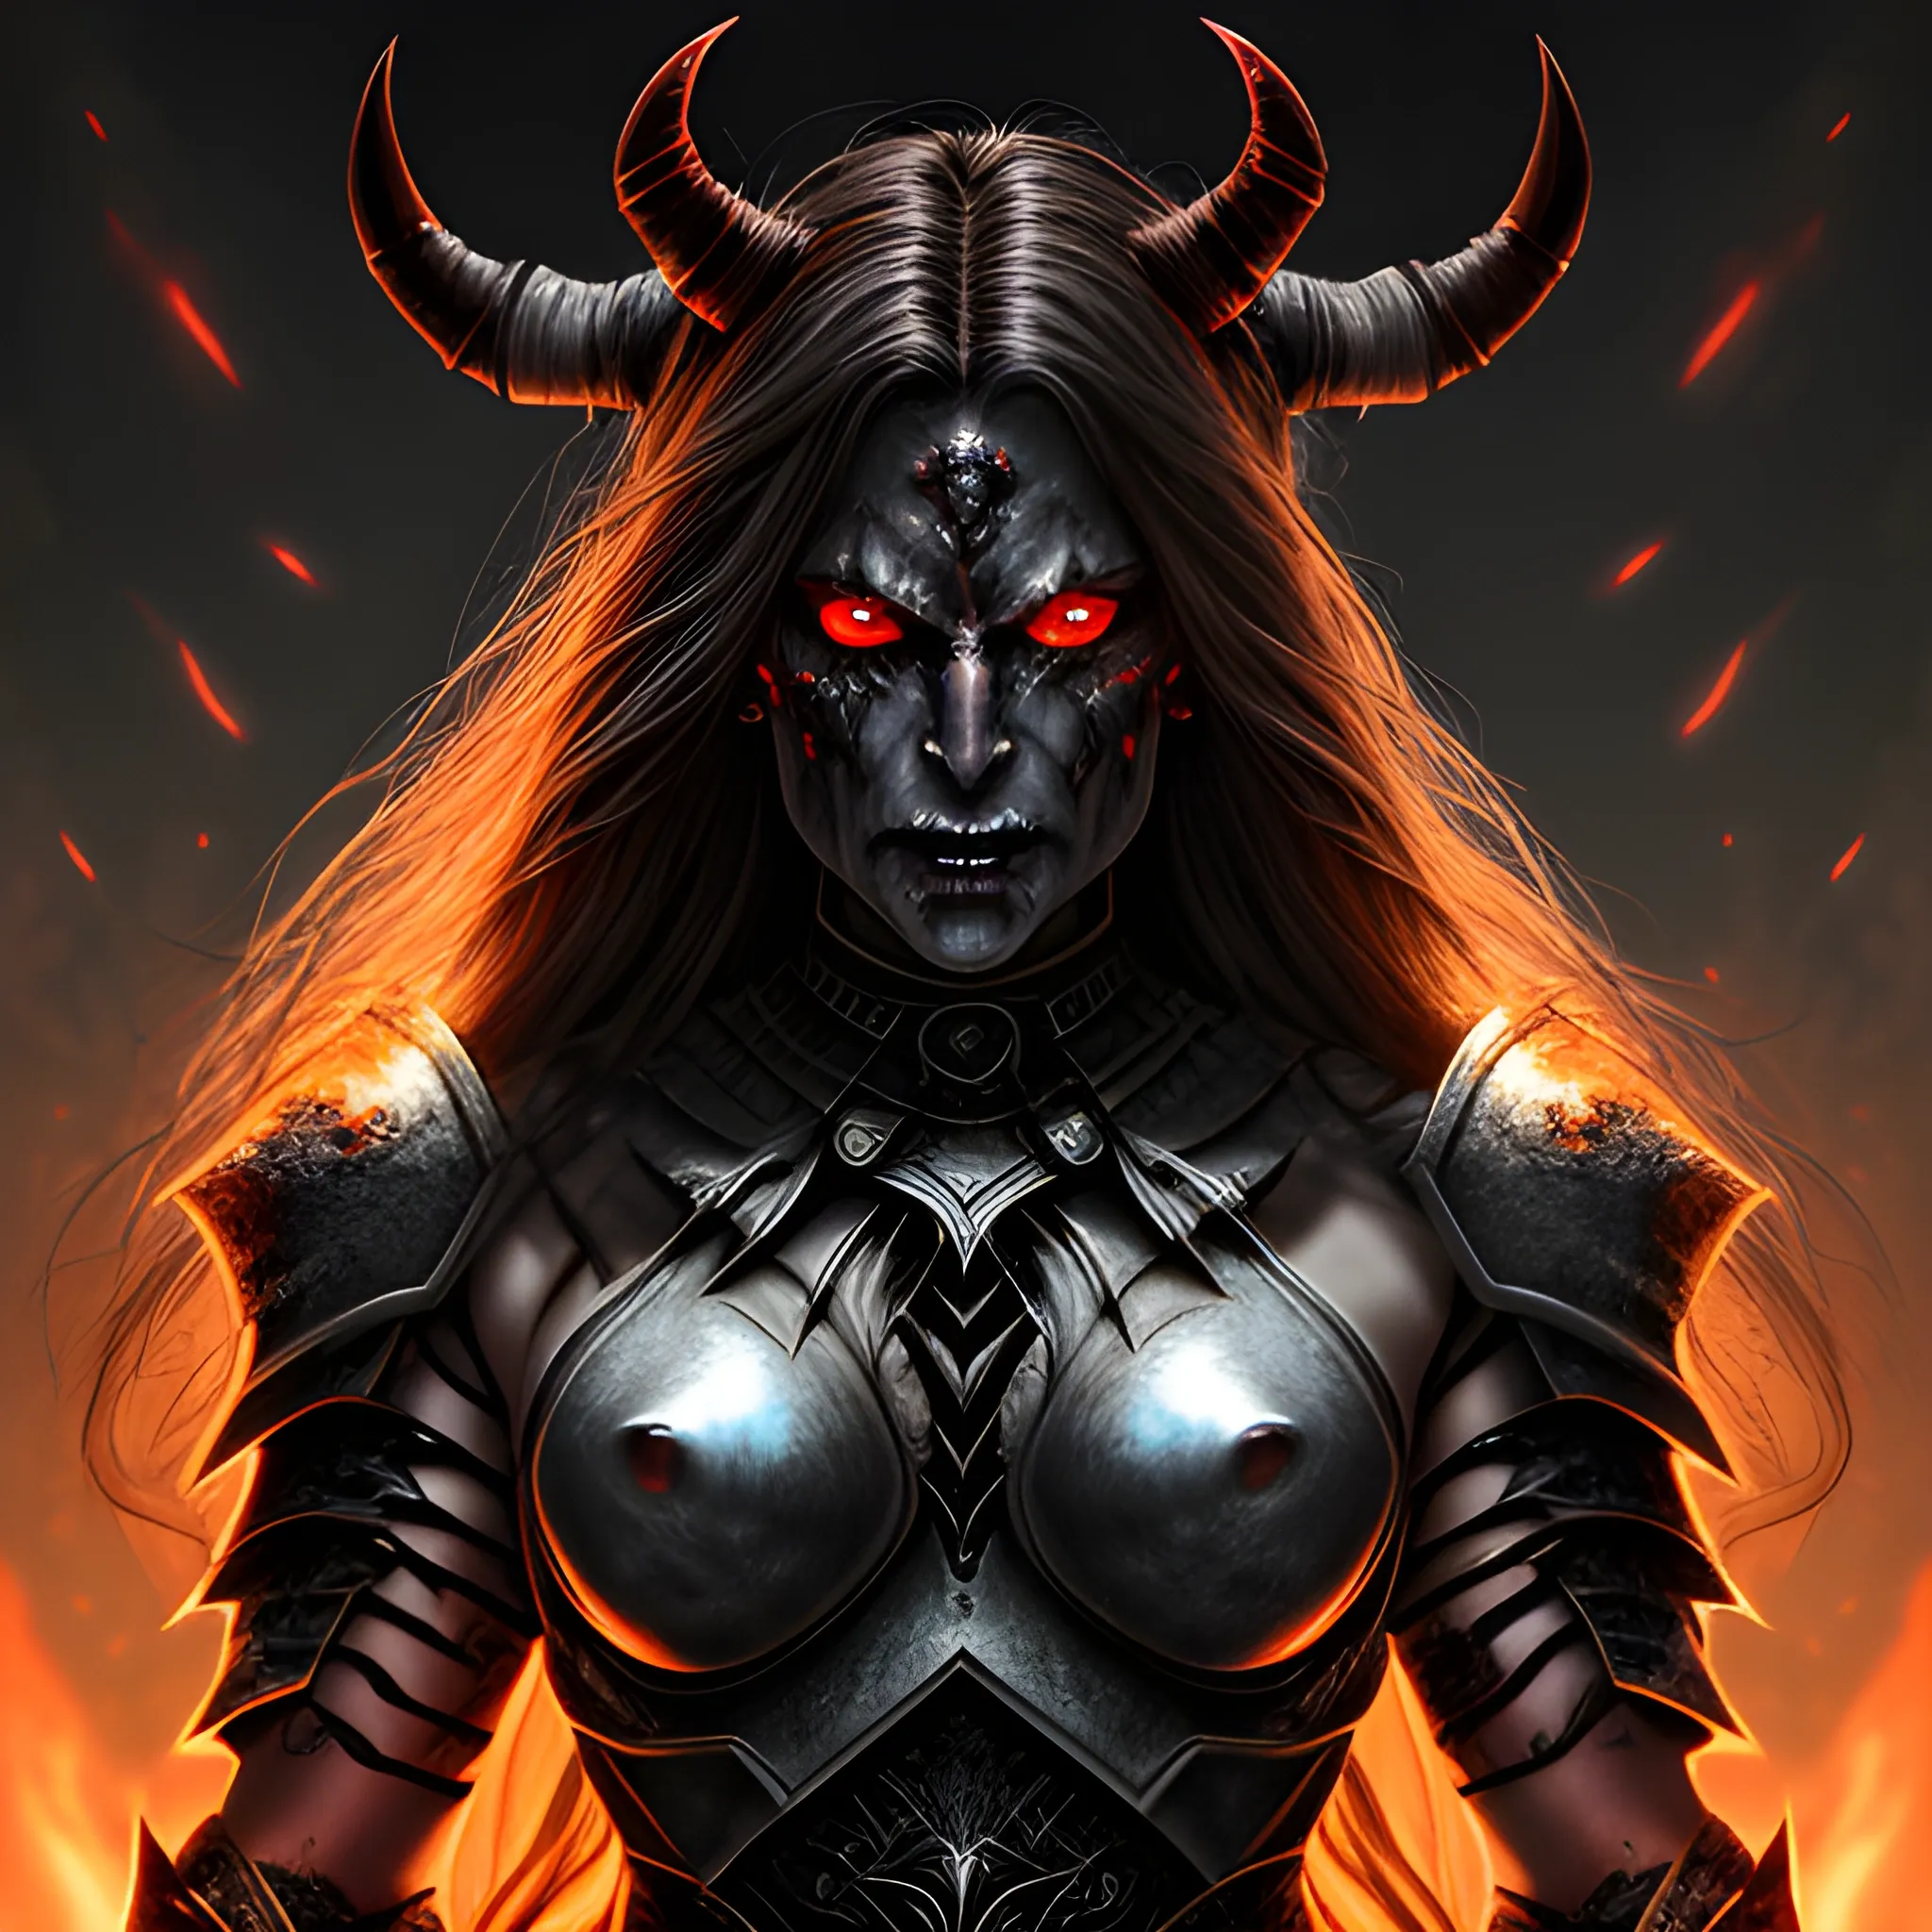 detailed portrait, strong dark female demon with glowing eyes and long hair, in warrior armor